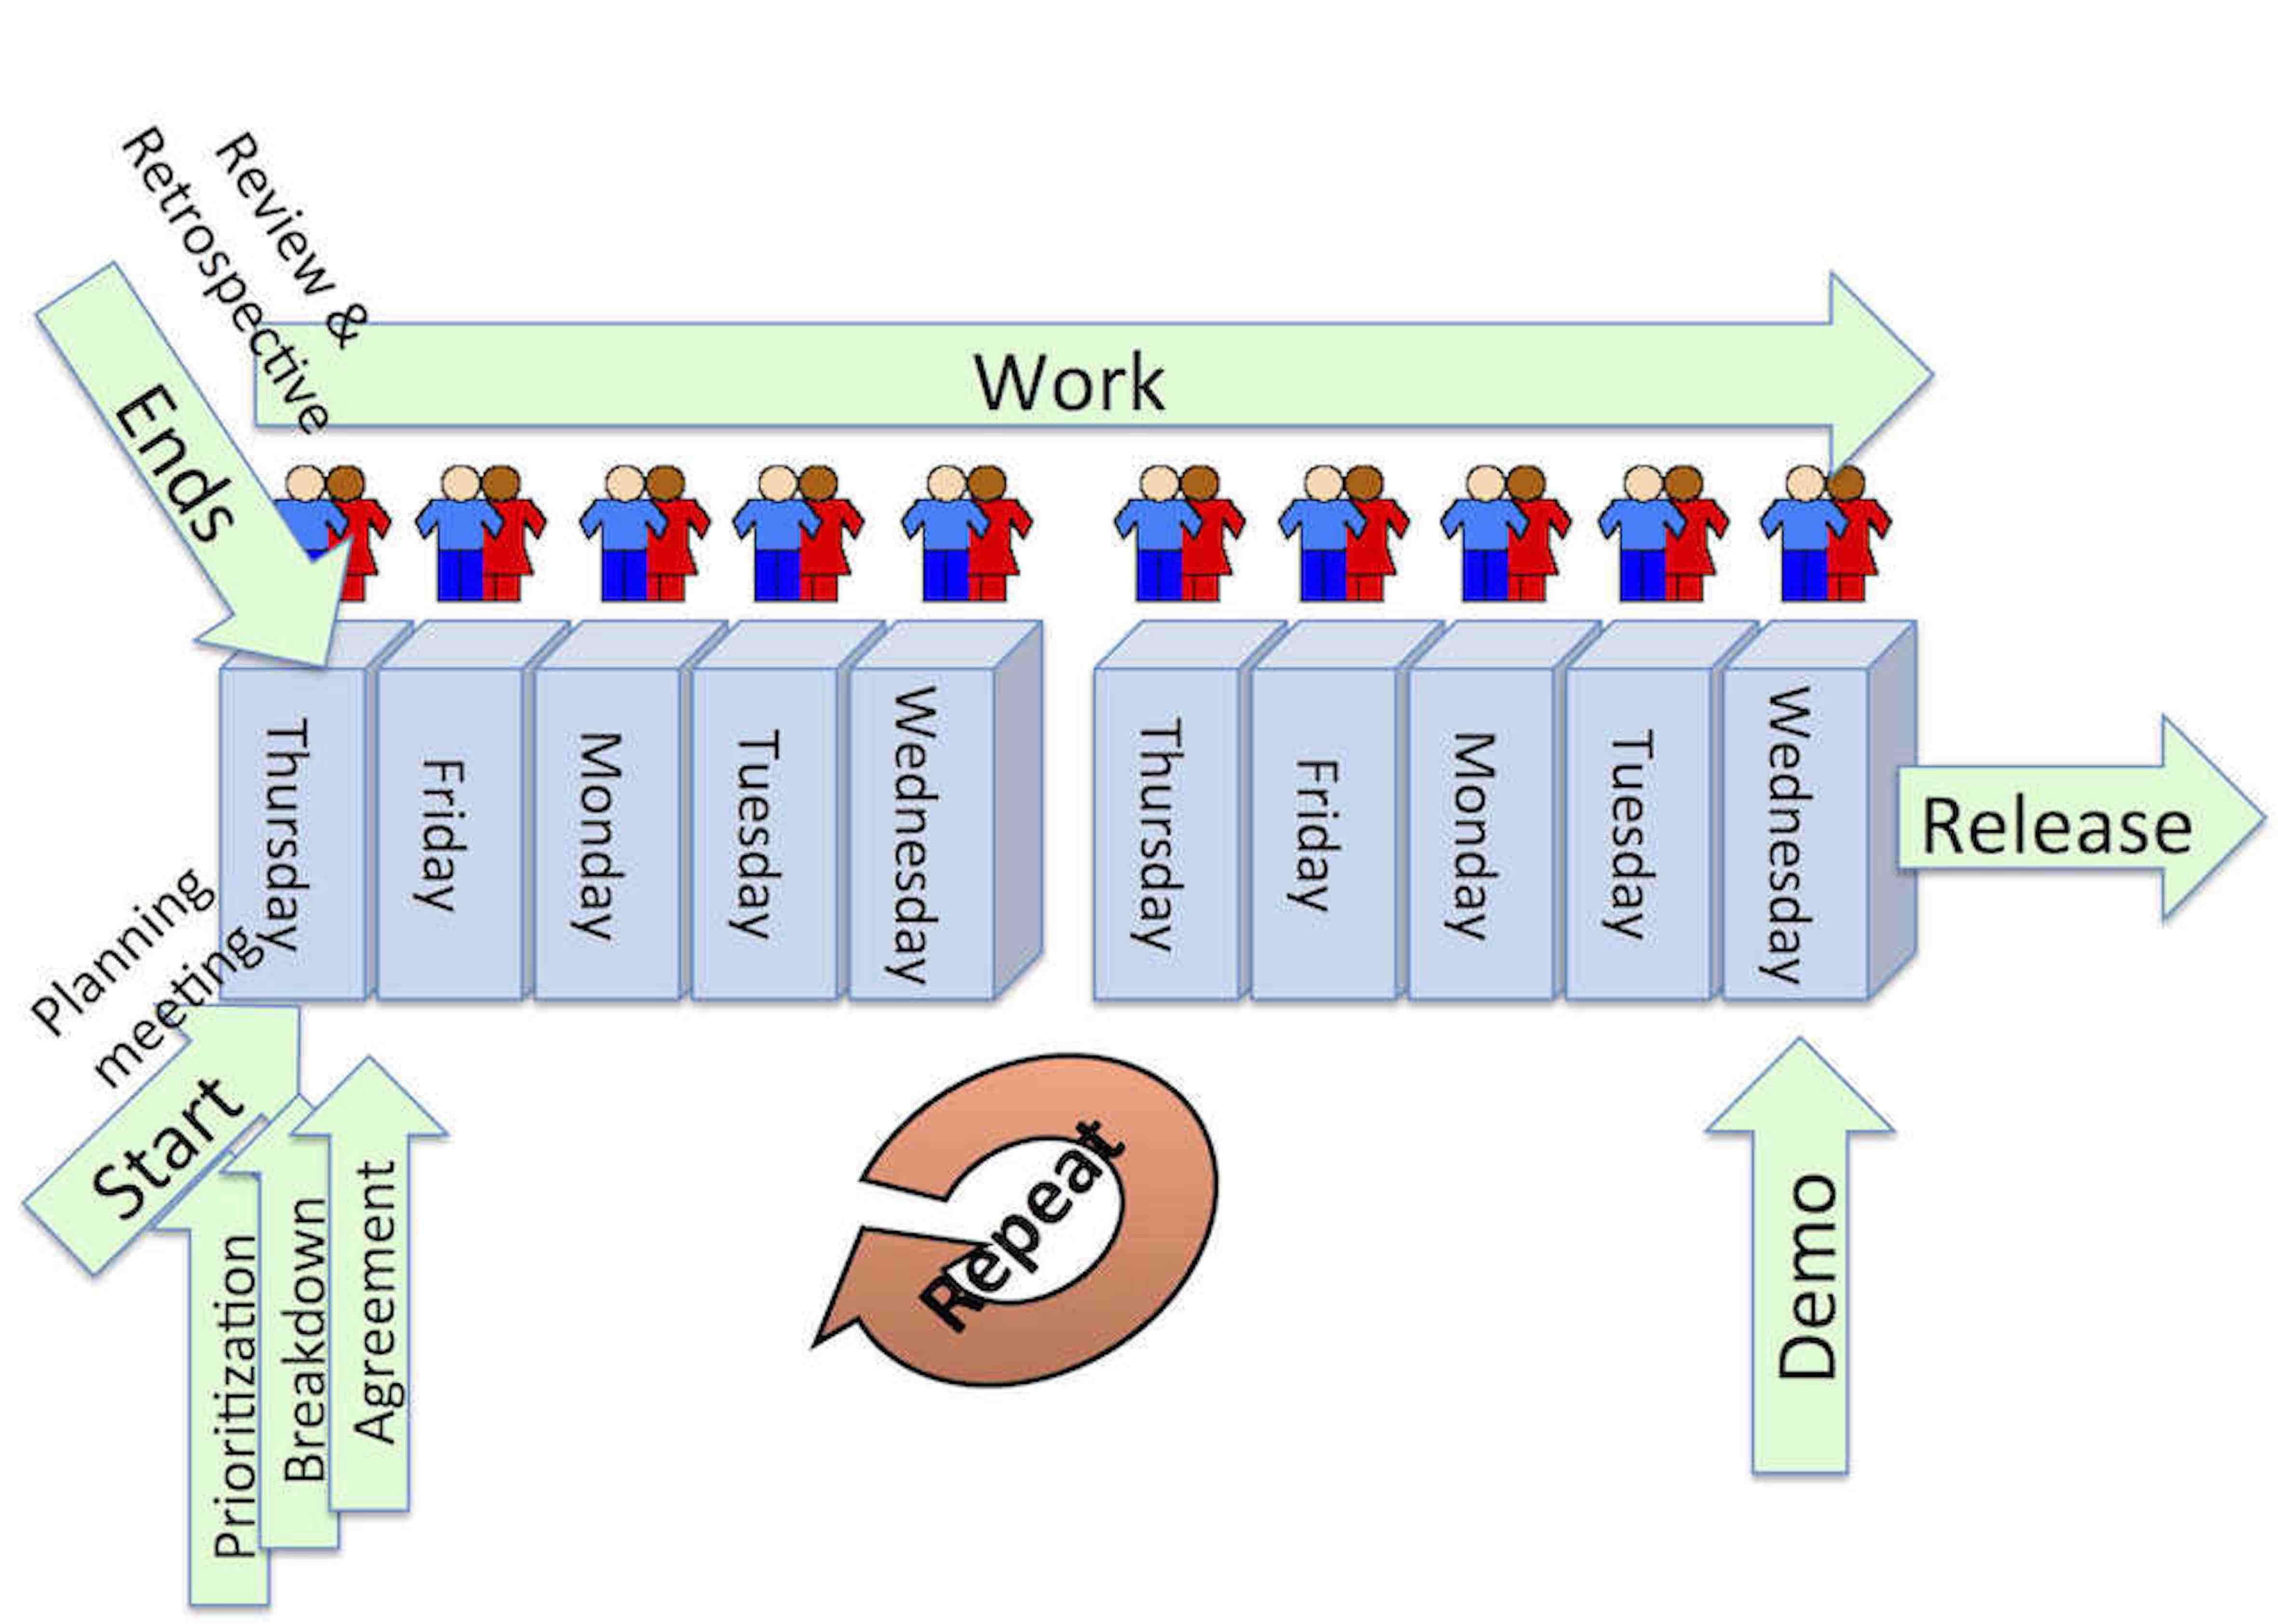 Figure 3 - Typical 2 week iteration (sprint)